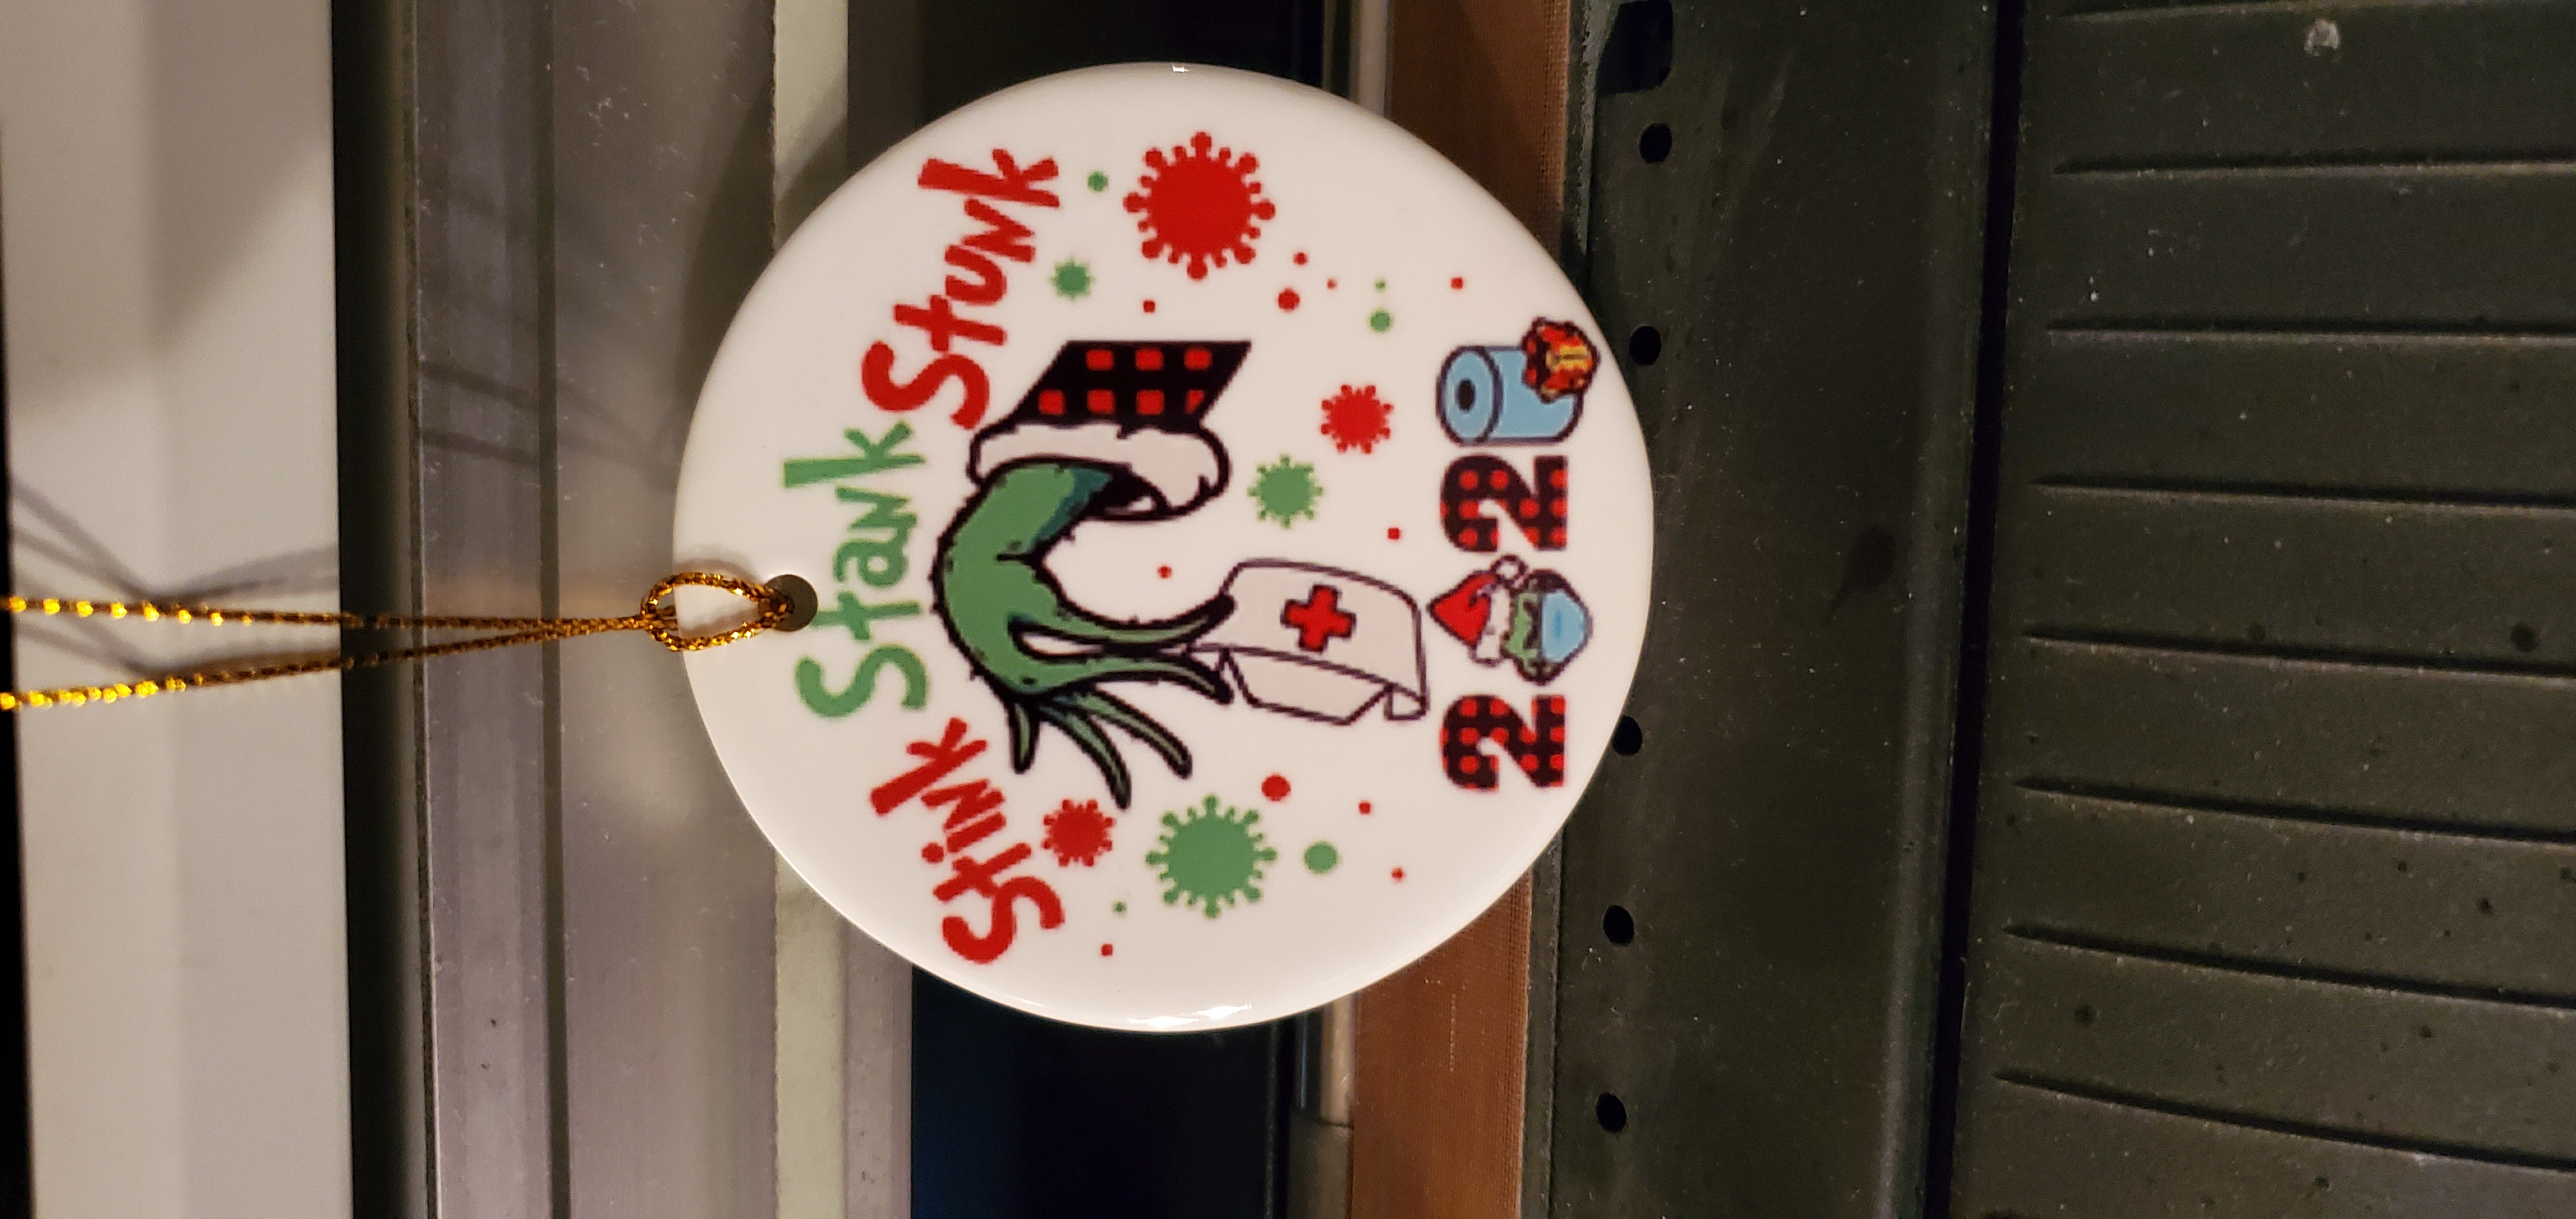 The grinch 2020 stink, stank,,stunk made with sublimation printing